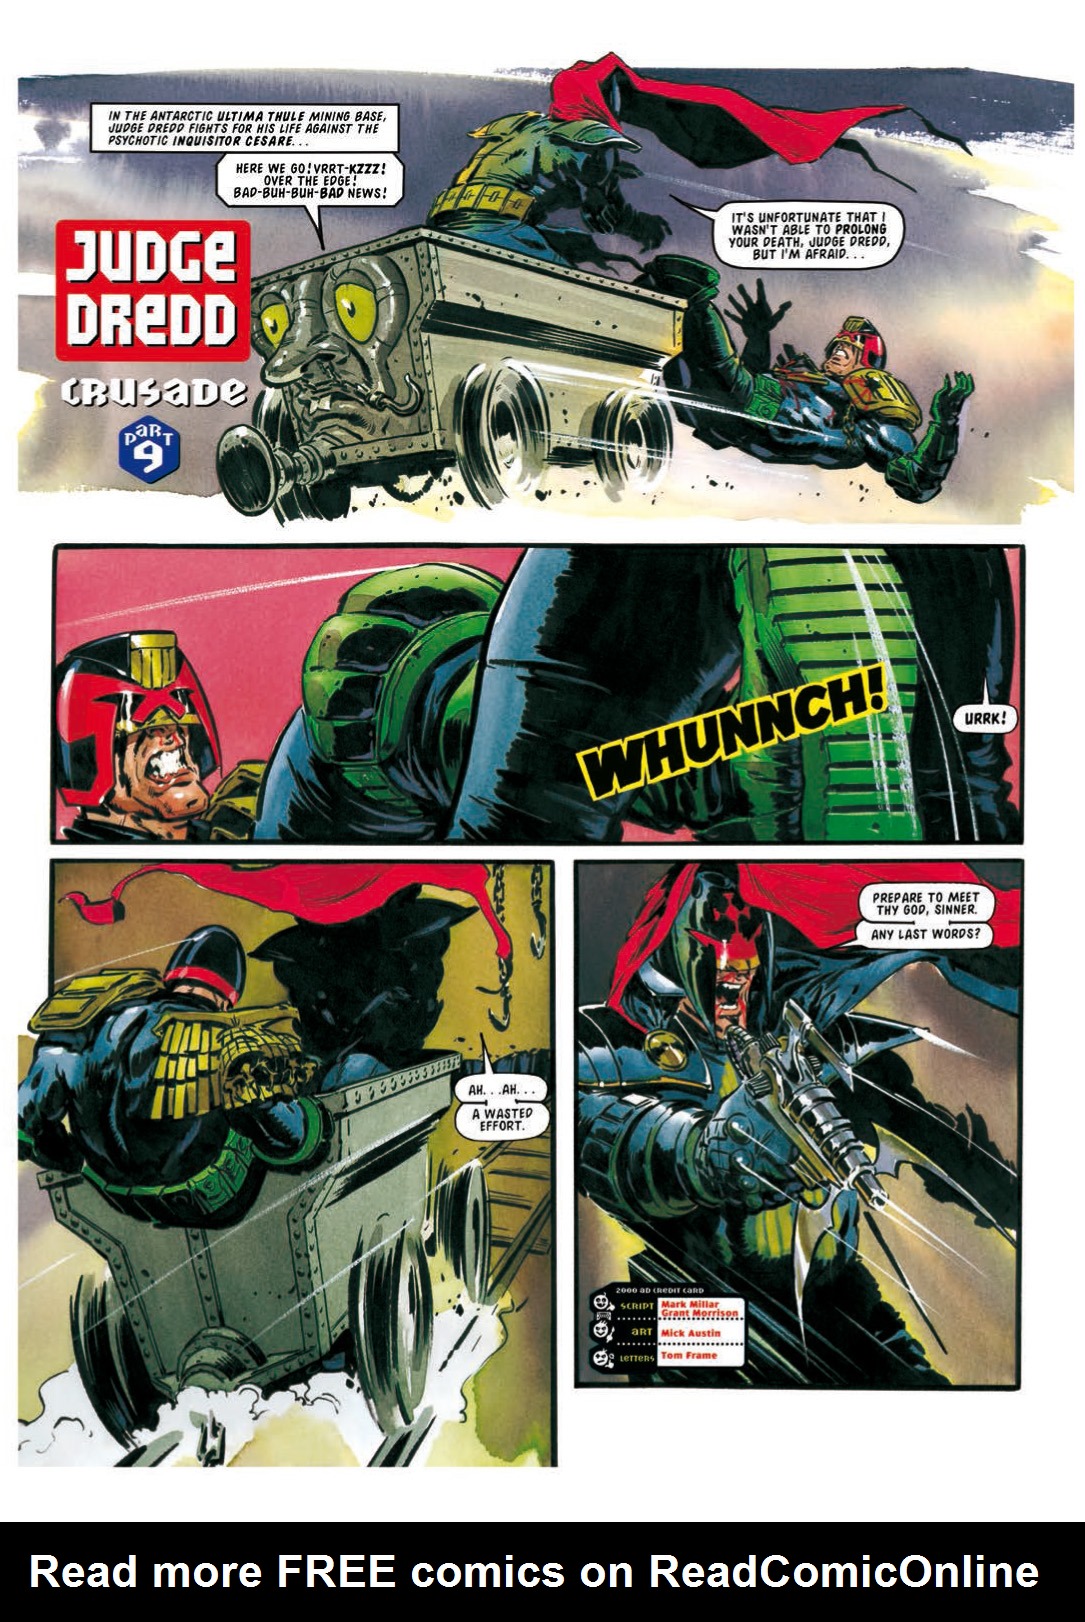 Read online Judge Dredd: The Complete Case Files comic -  Issue # TPB 22 - 148